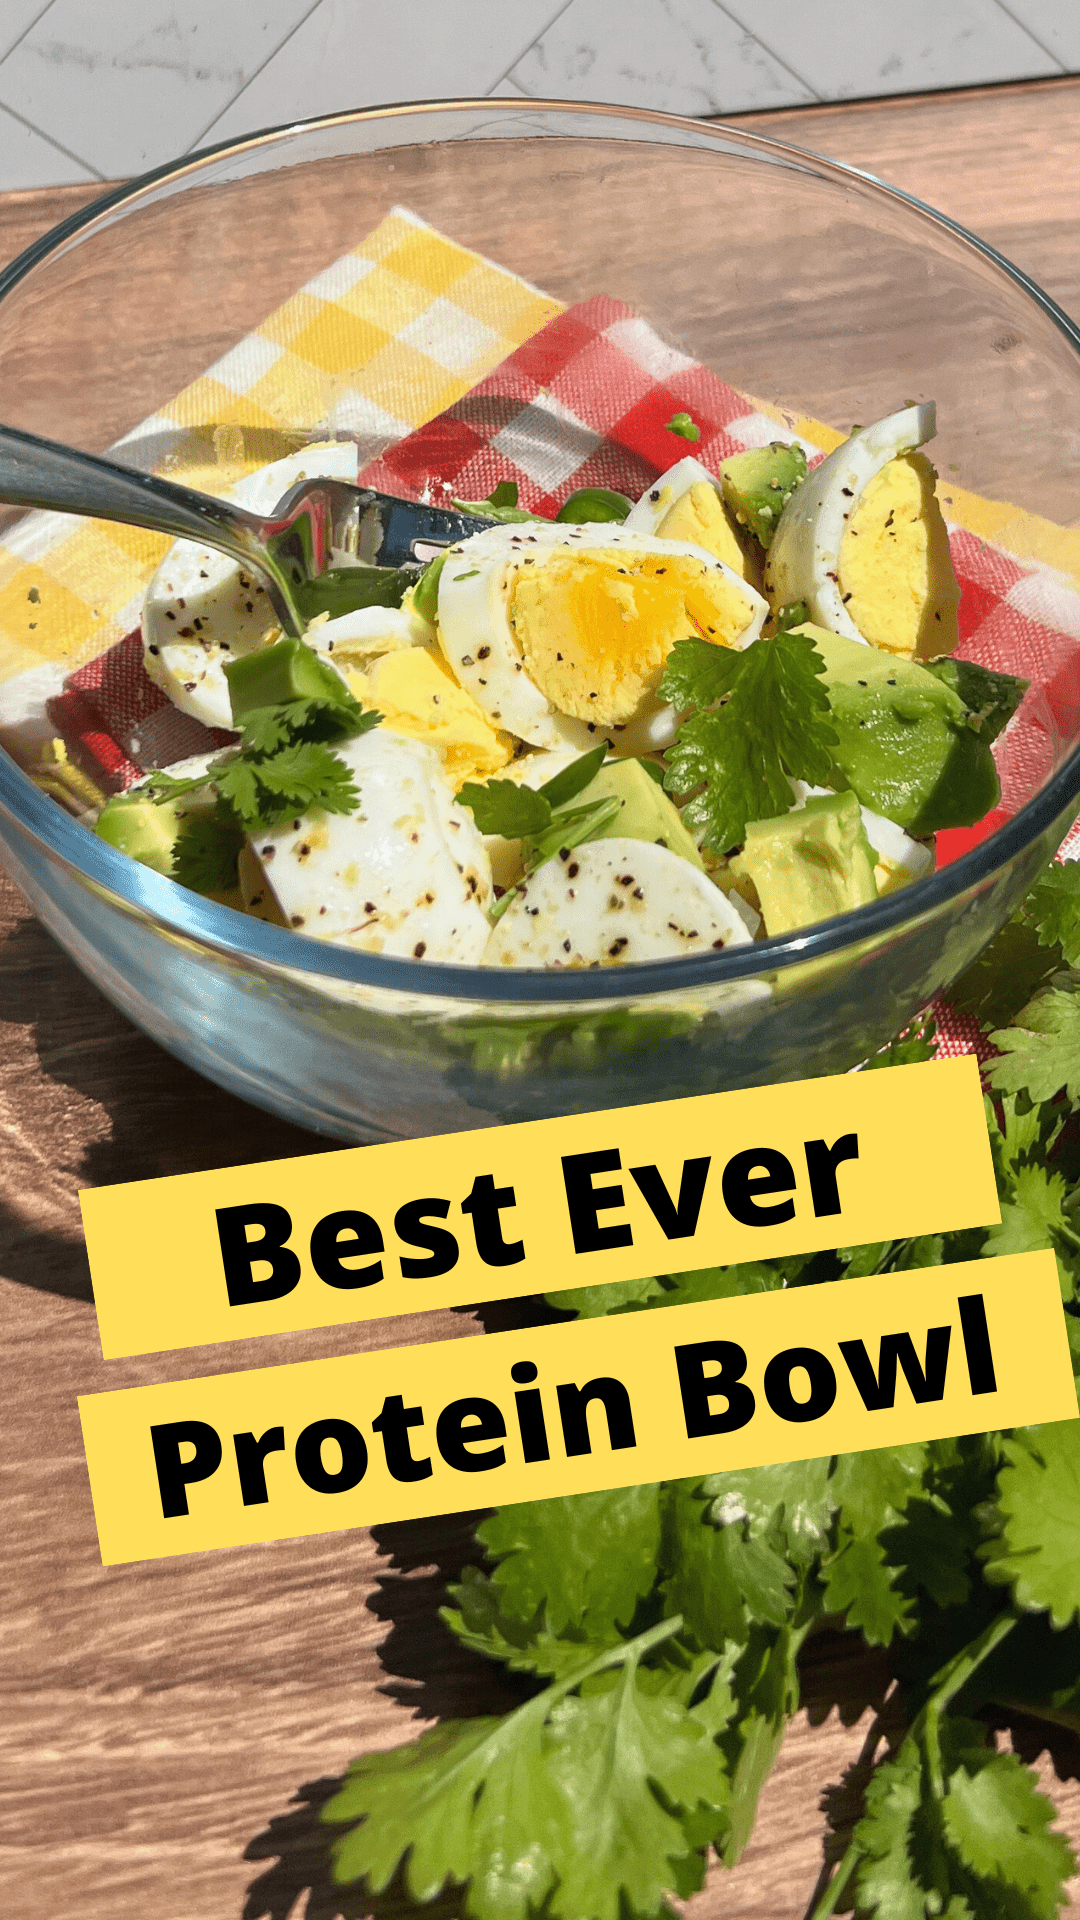 Best Ever Hard Boiled Eggs and Avocado Protein Bowl